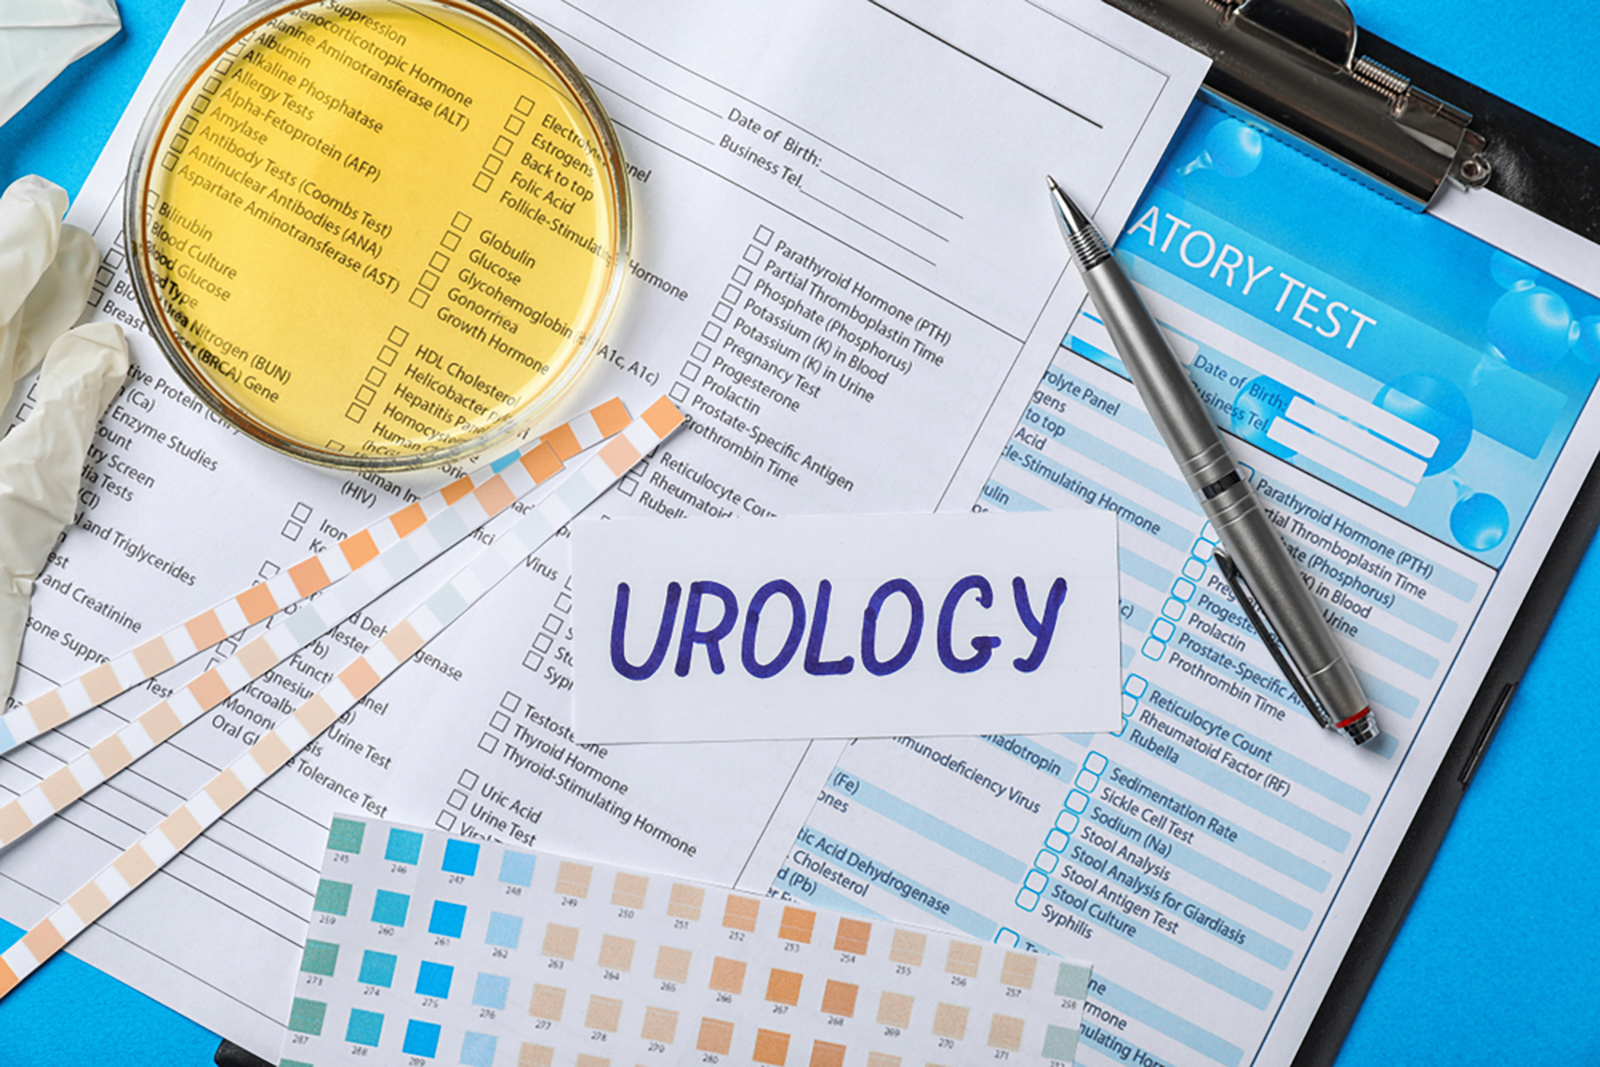 icd 10 codes for urology, icd 10 code for urology follow up, icd 10 code for urology evaluation, icd 10 code for urology, icd 10 urology codes list